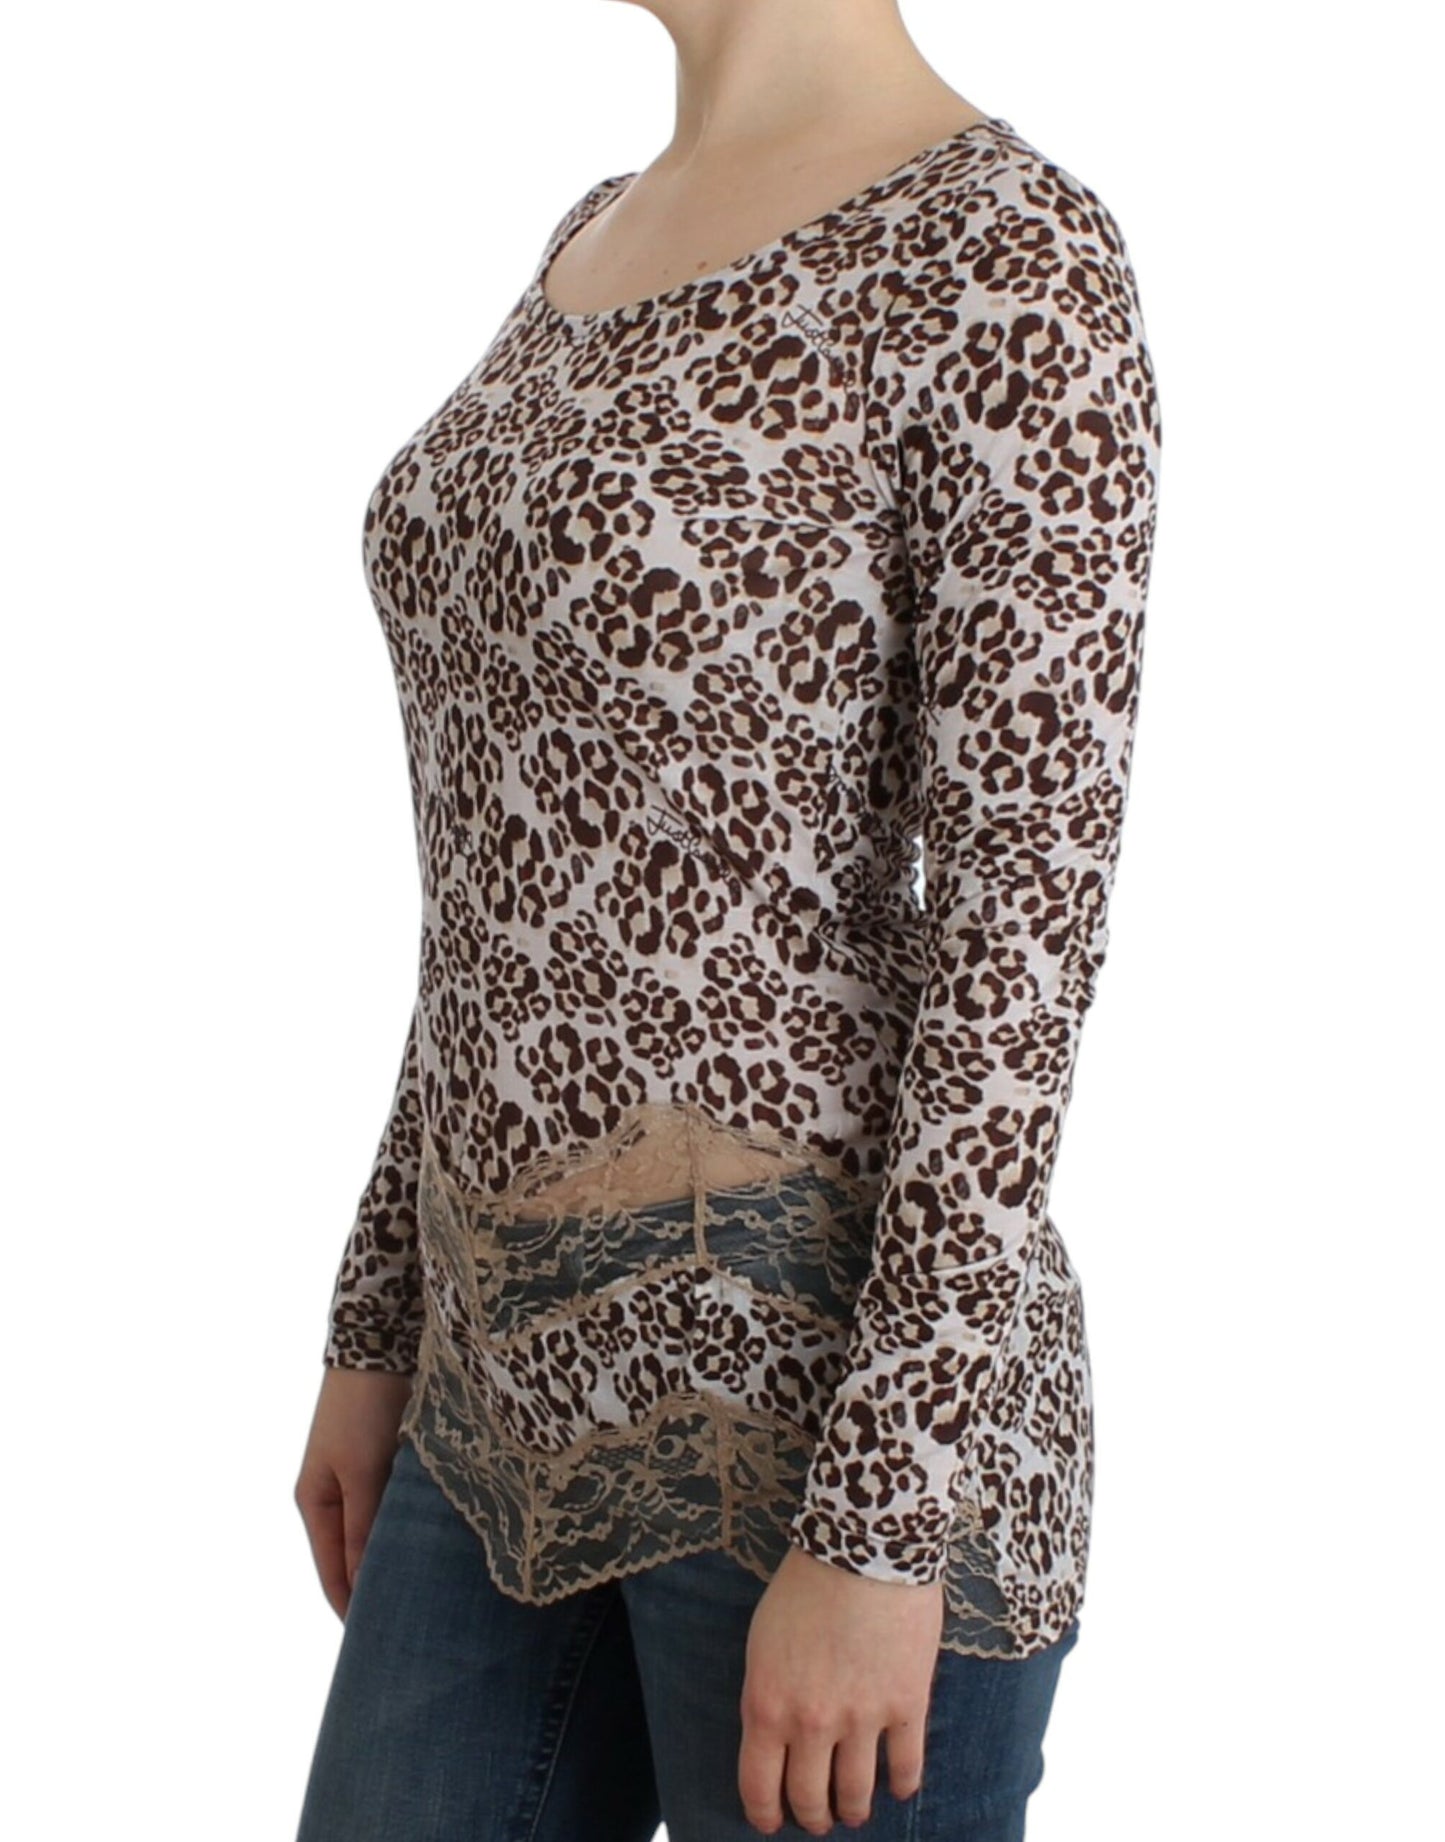 Cavalli Brown longsleeved lace top - Gio Beverly Hills